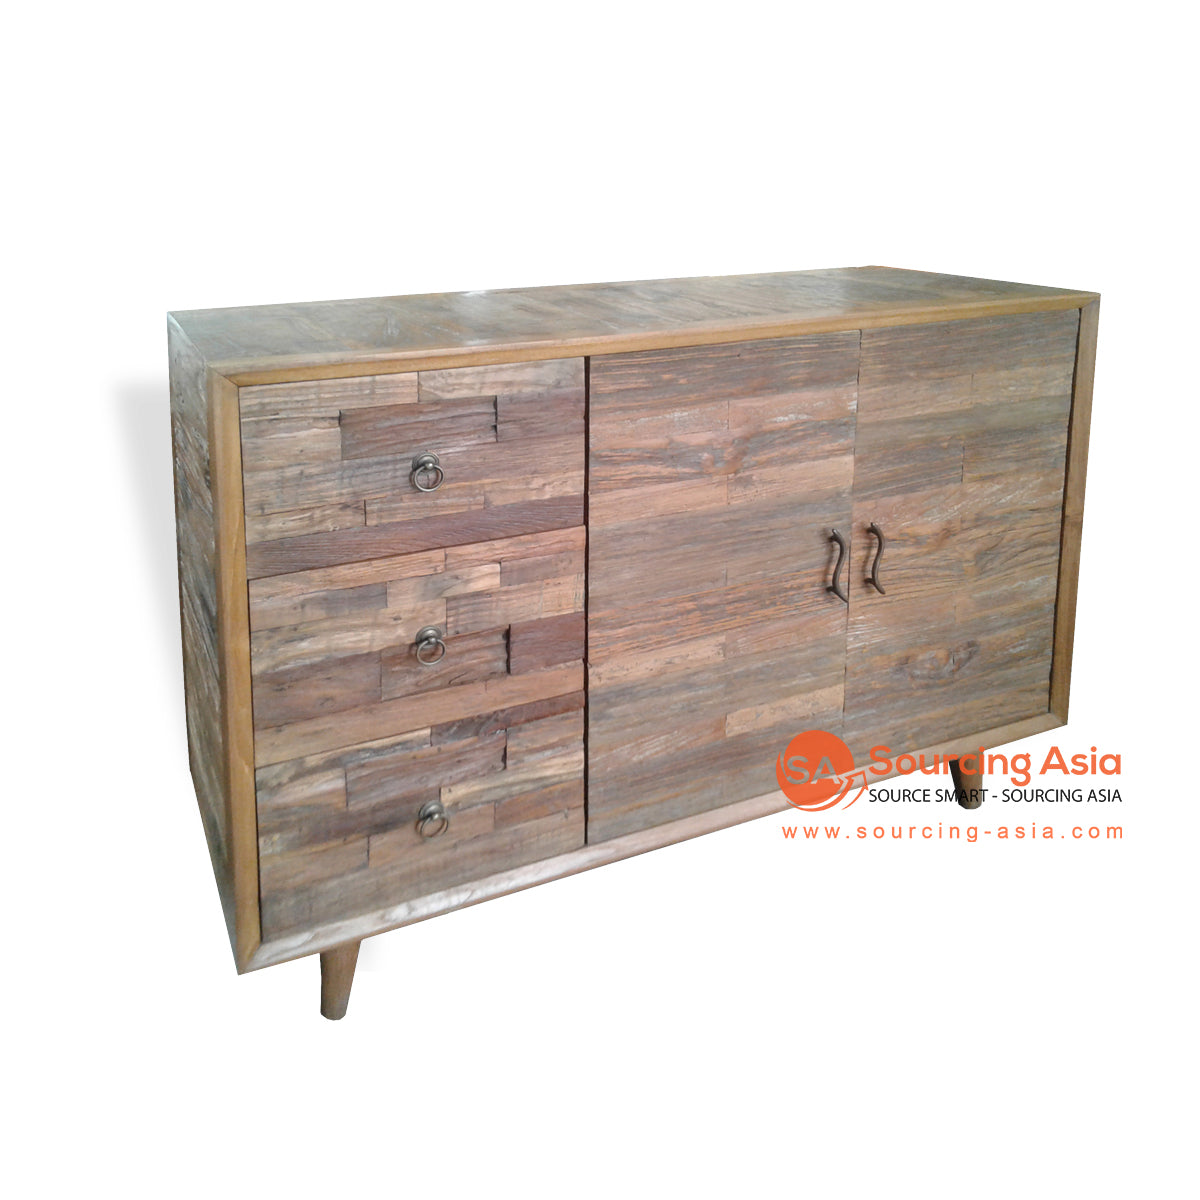 DLO002-1 NATURAL RECYCLED BOAT WOOD TWO DOORS AND THREE DRAWERS RETRO BUFFET